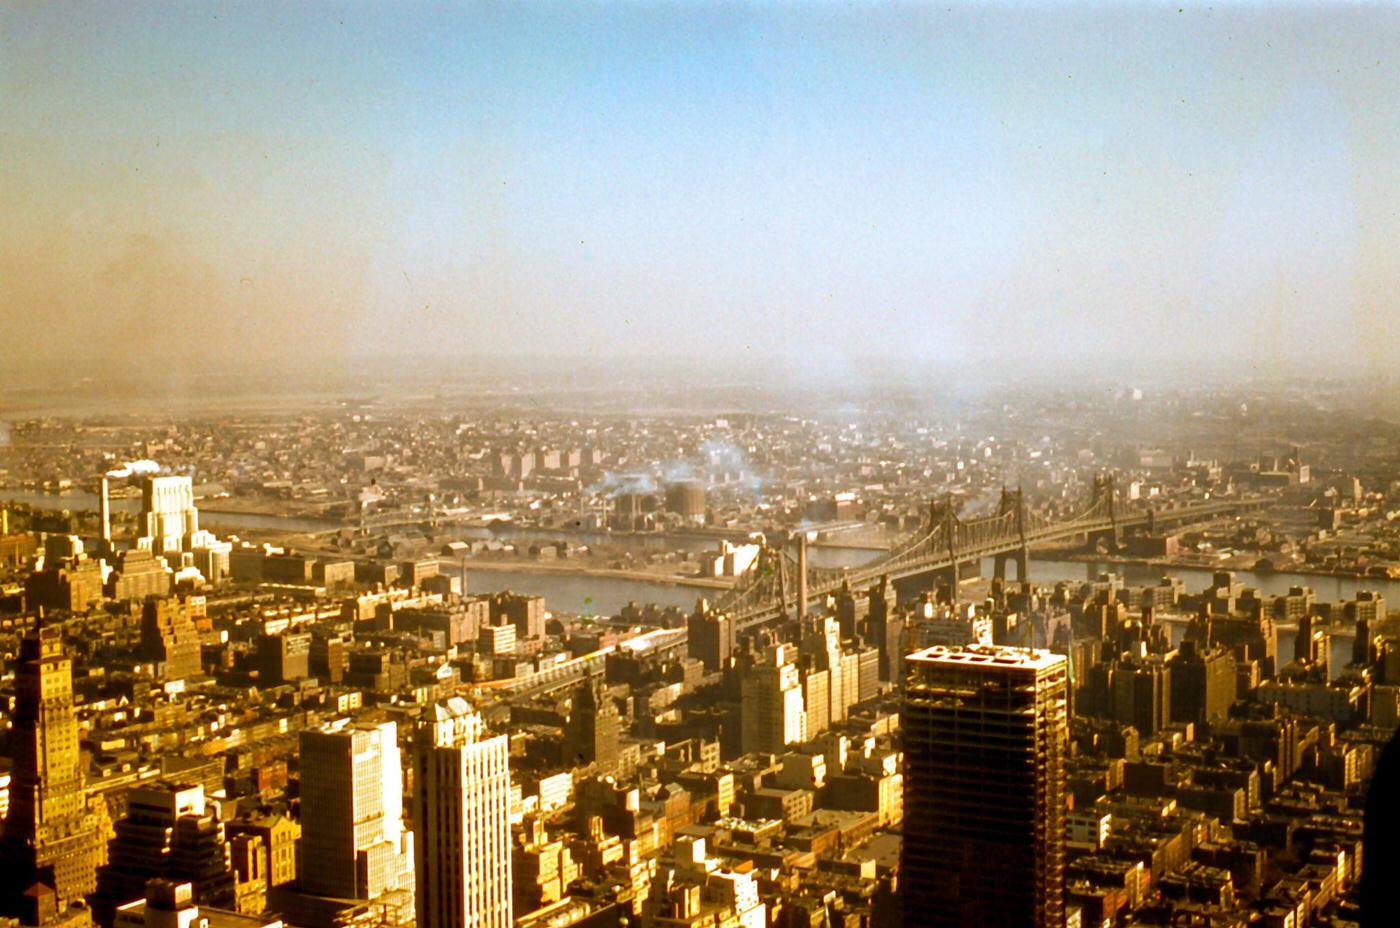 Panoramic View Of The Upper East Side Of Manhattan And Astoria, Queens Including The Seagram Building And Queensboro-59Th Street Bridge, Manhattan, 1956